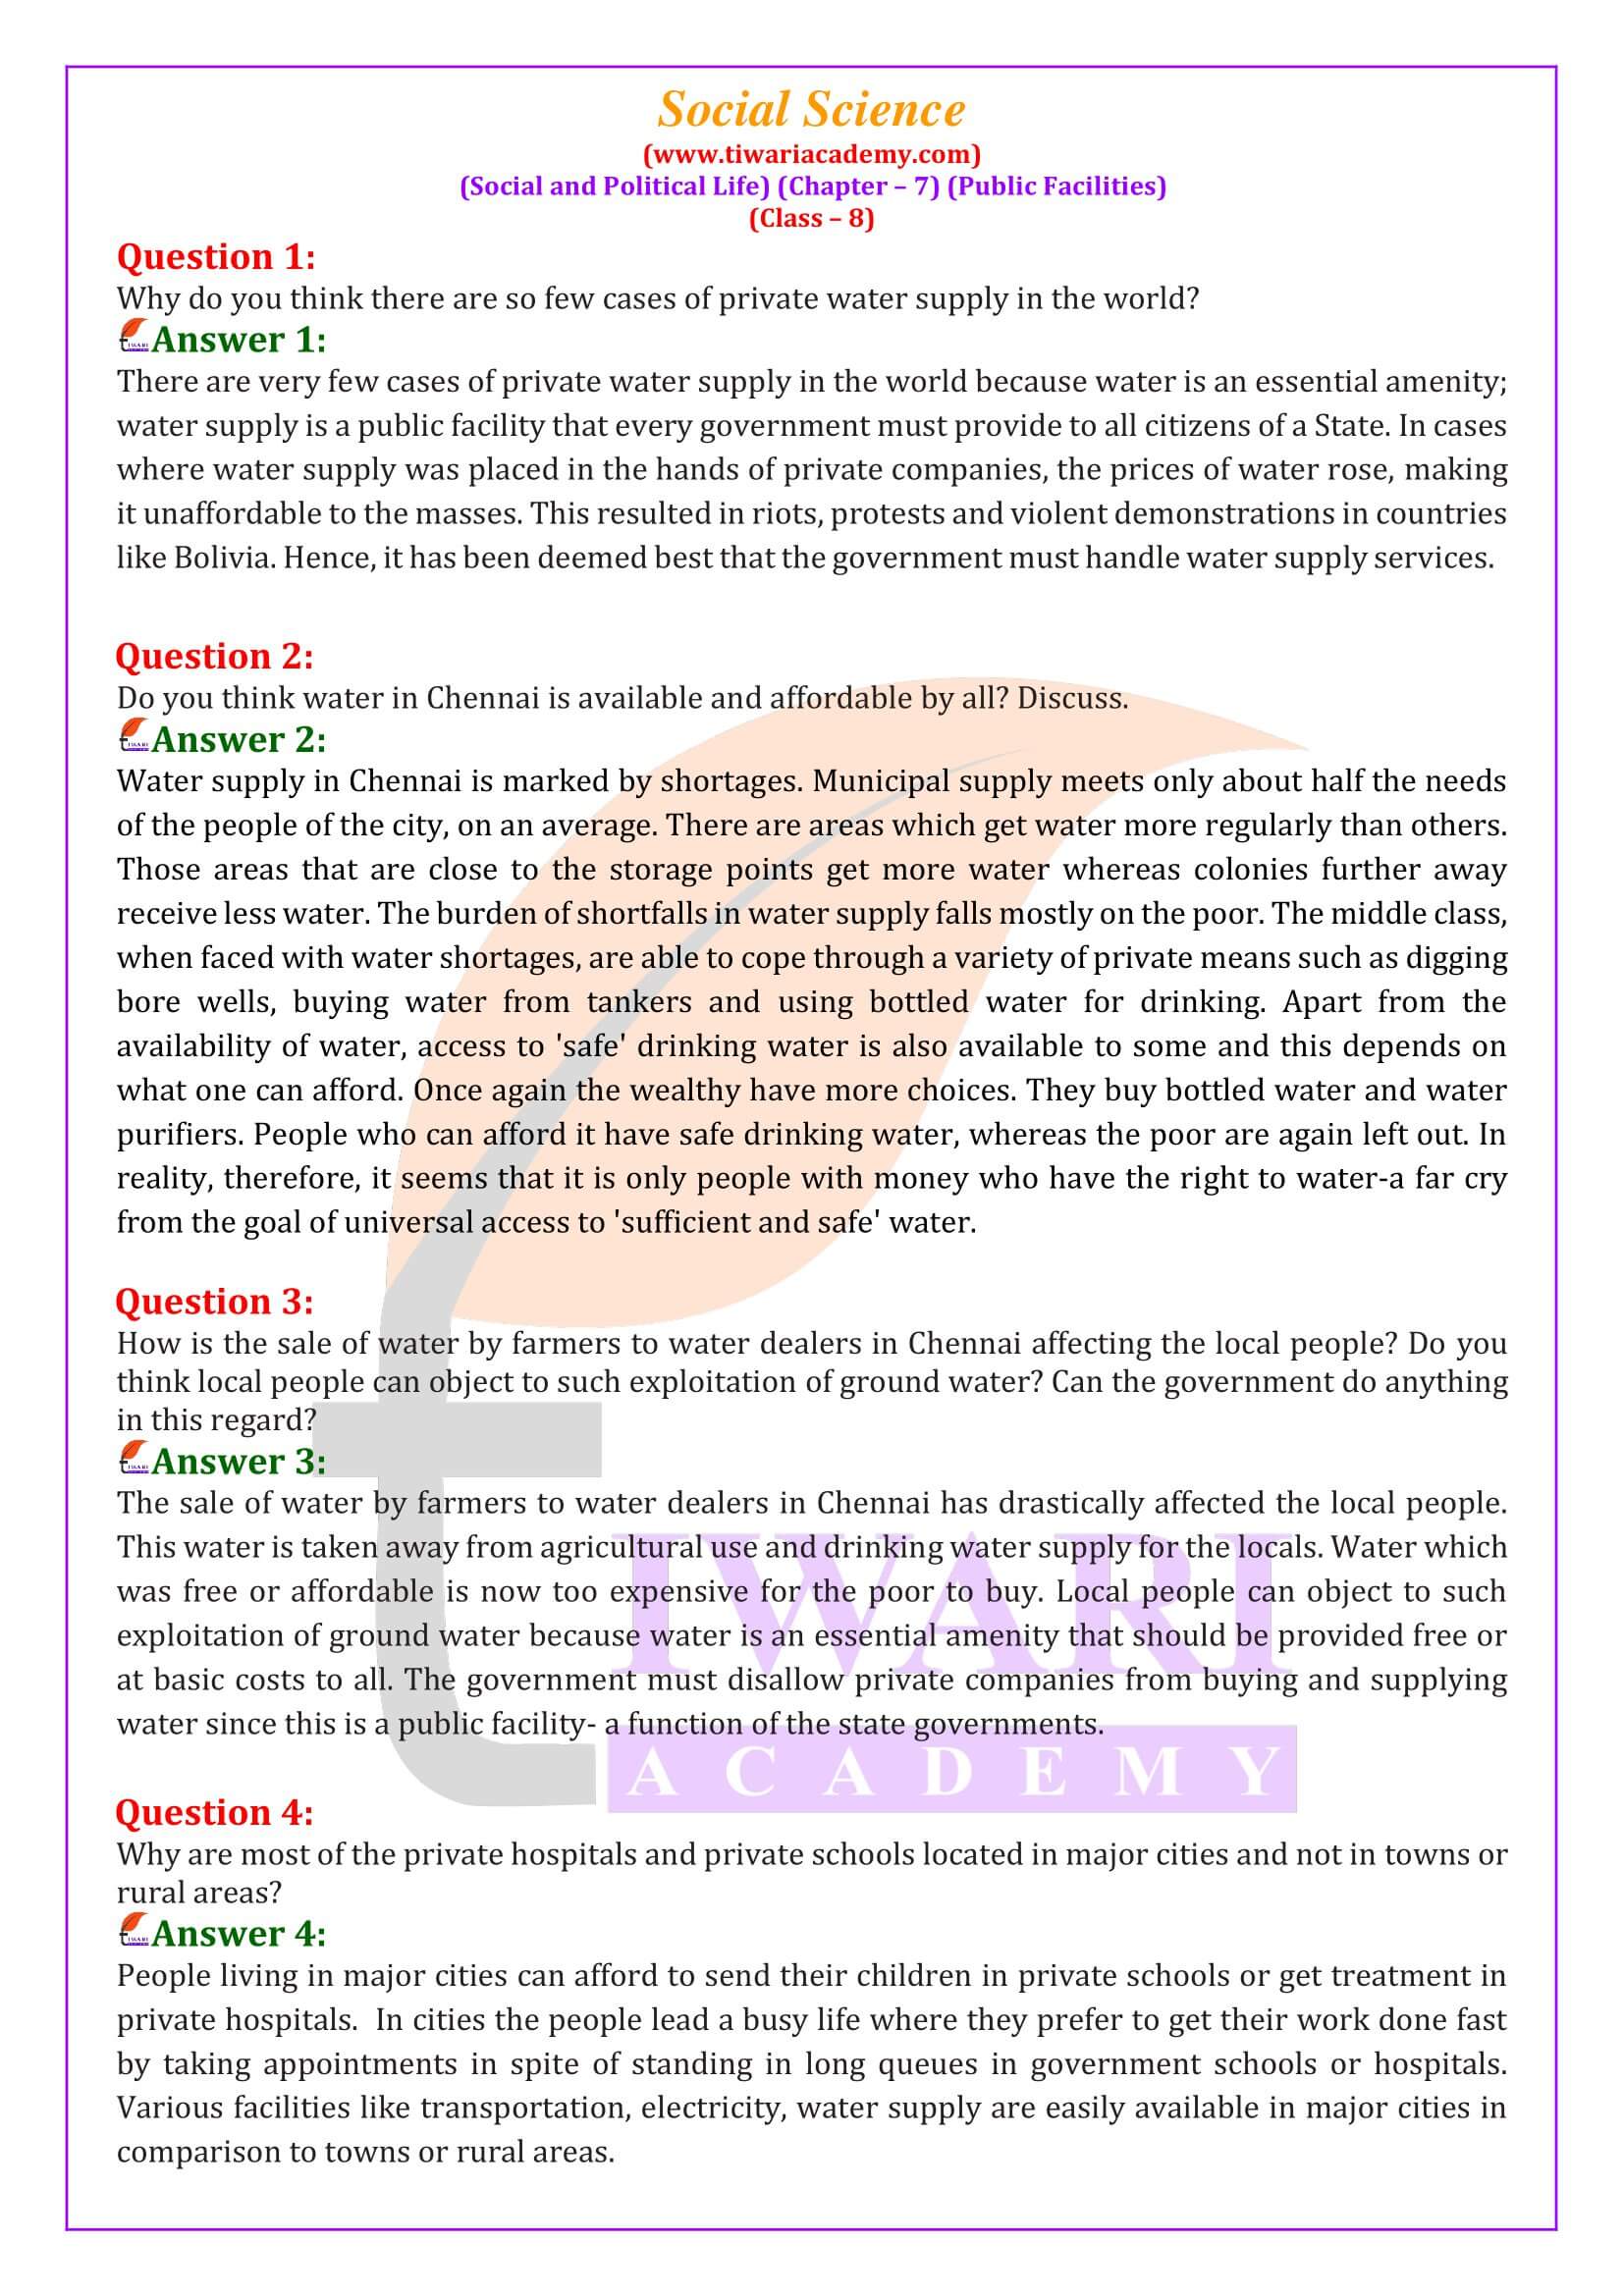 NCERT Solutions for Class 8 Social Science Civics Chapter 7 Public Facilities